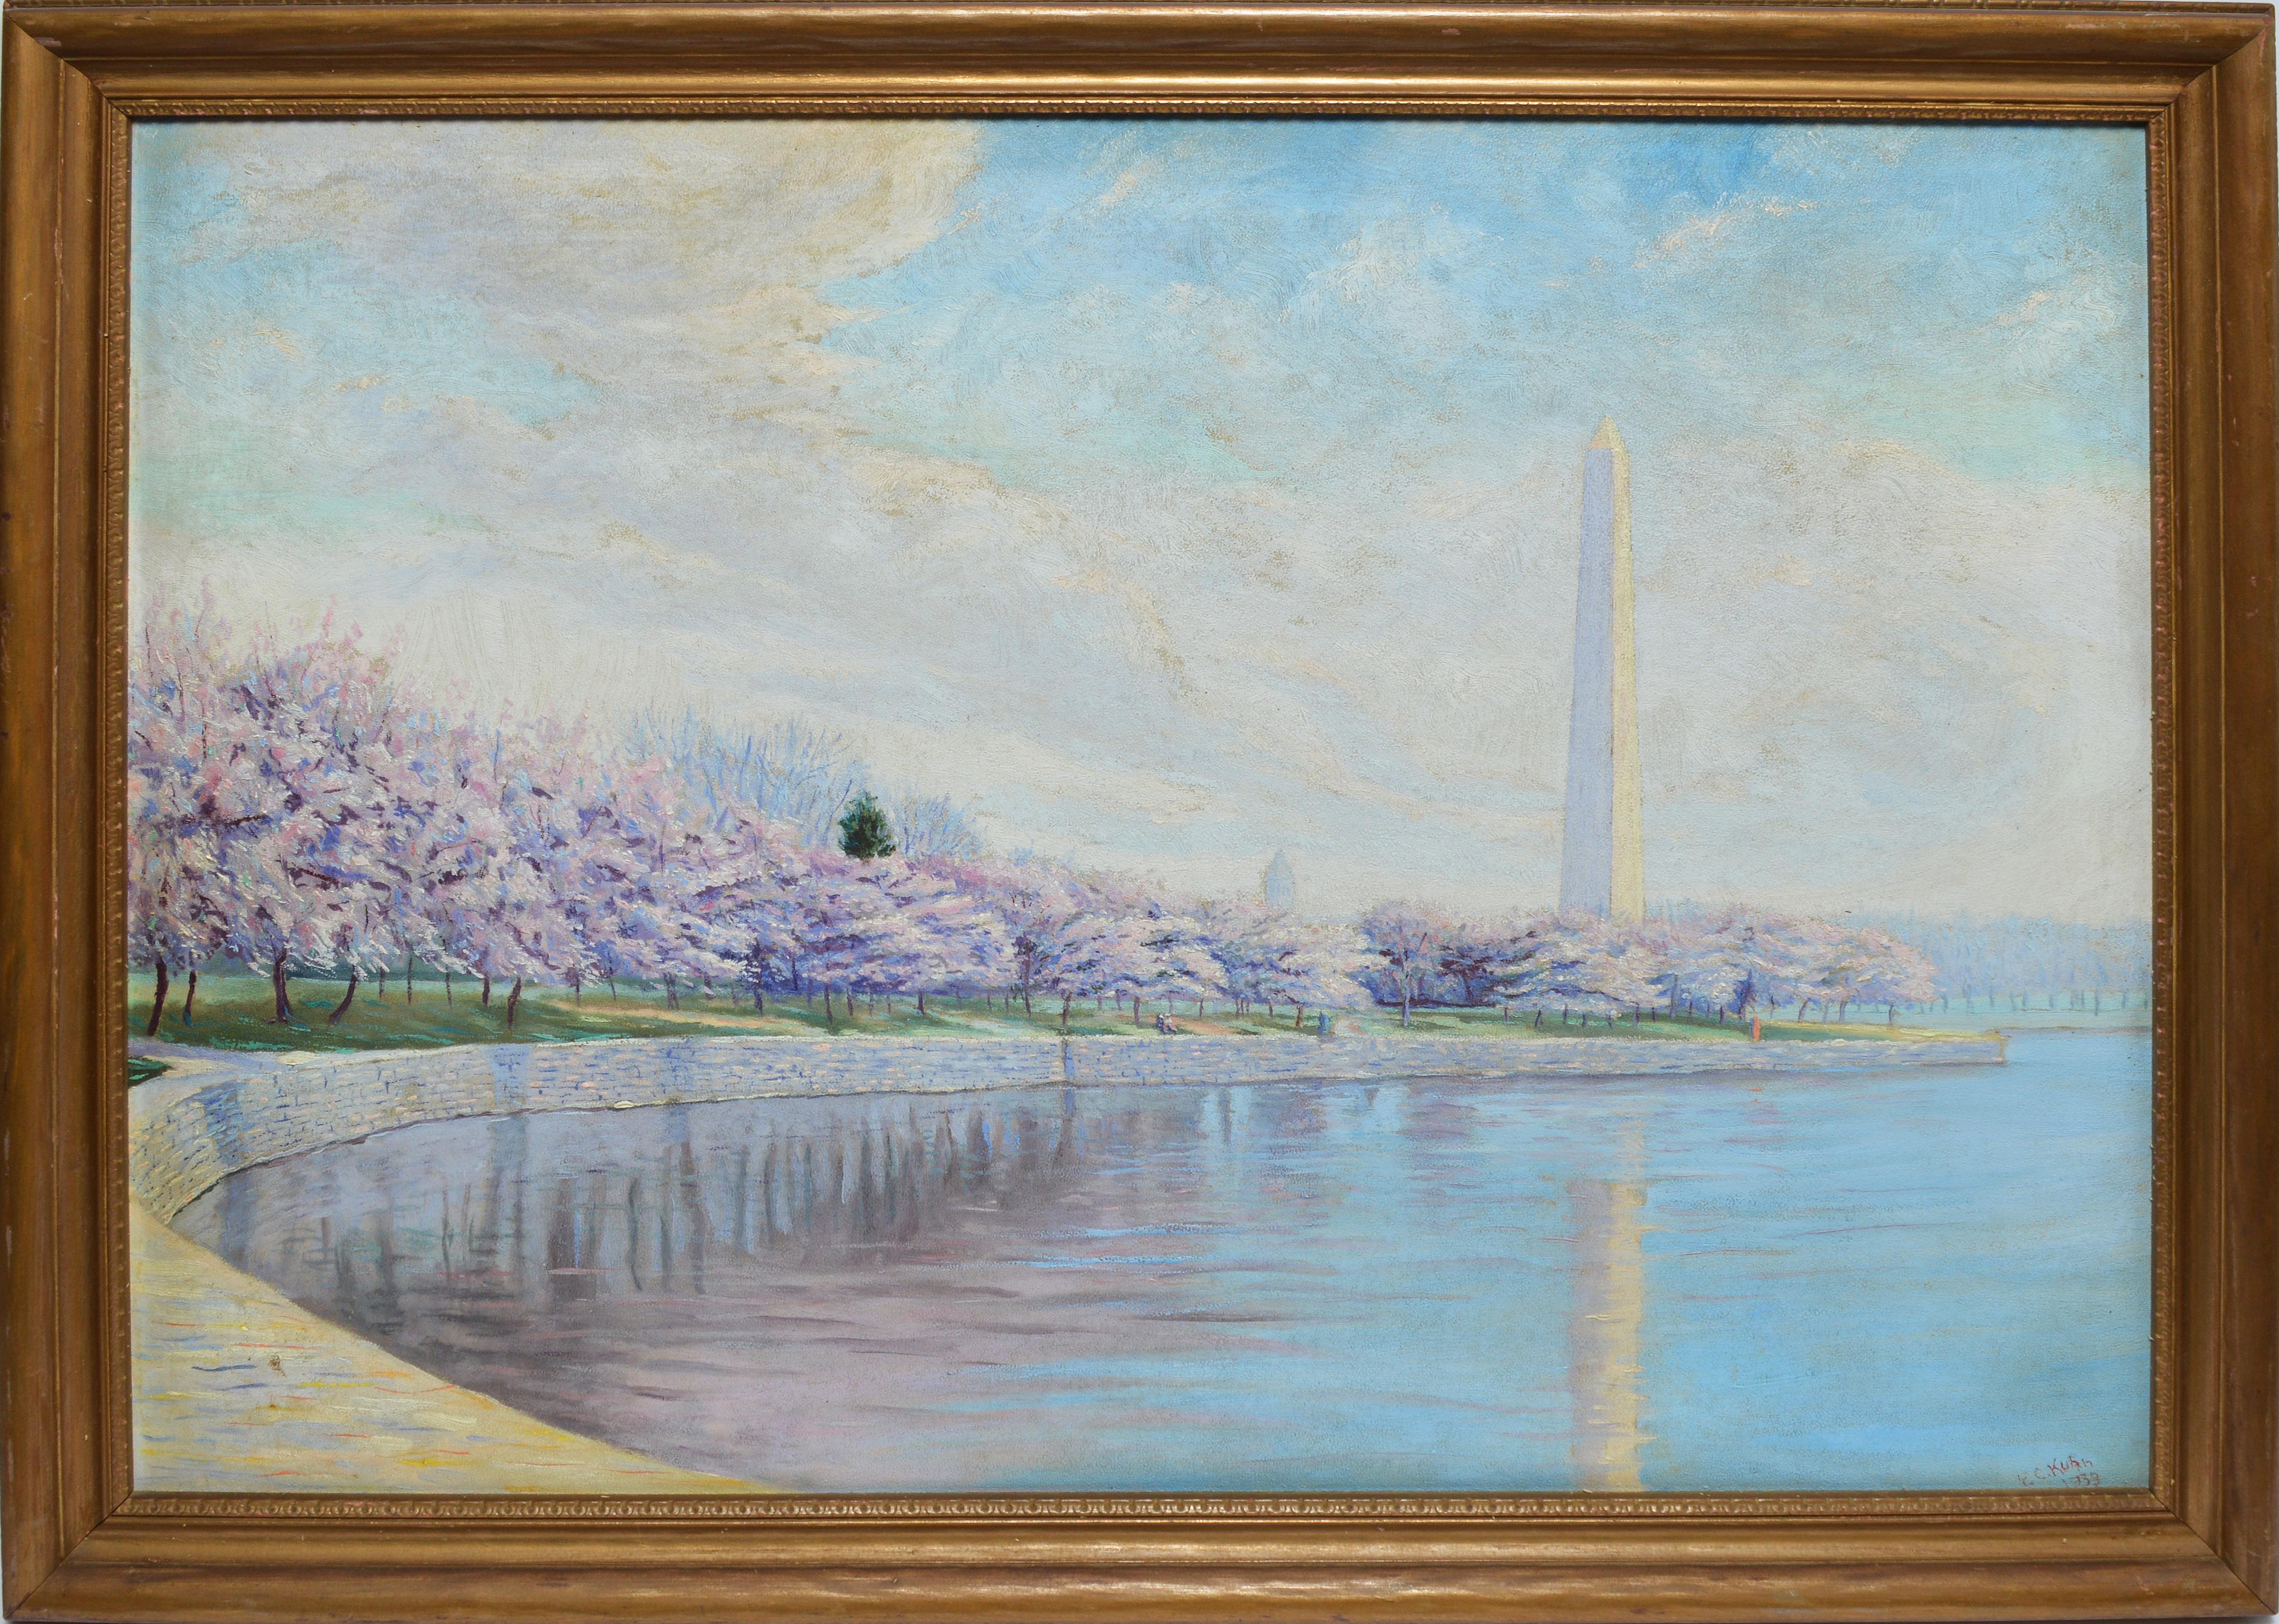 Unknown Landscape Painting - Antique American Impressionist Painting, Washington Monument with Cherry Blossom